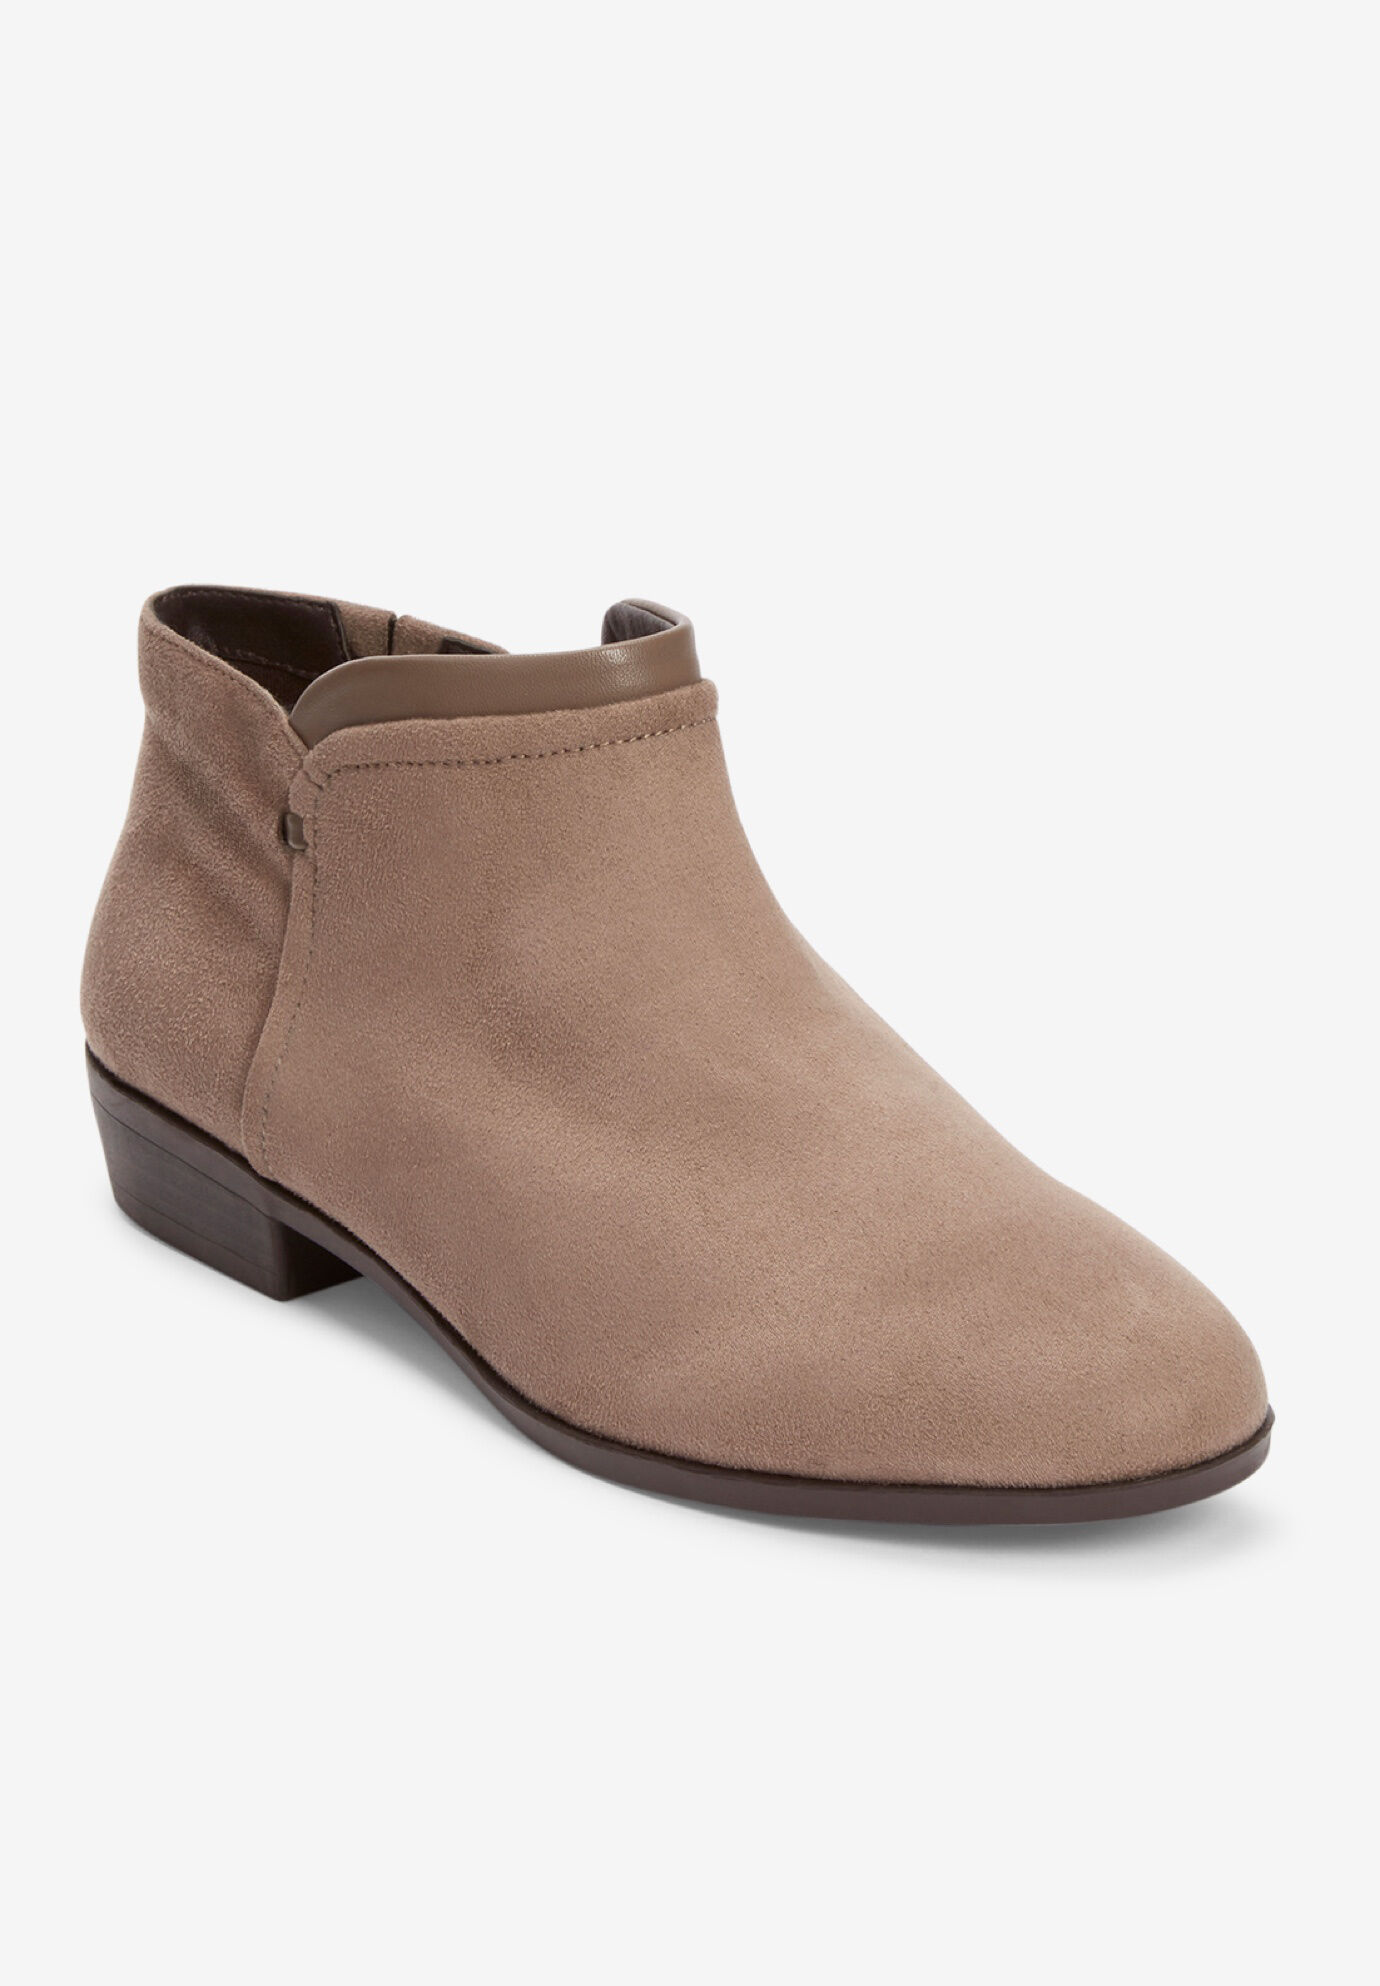 wide ankle boots flat heel